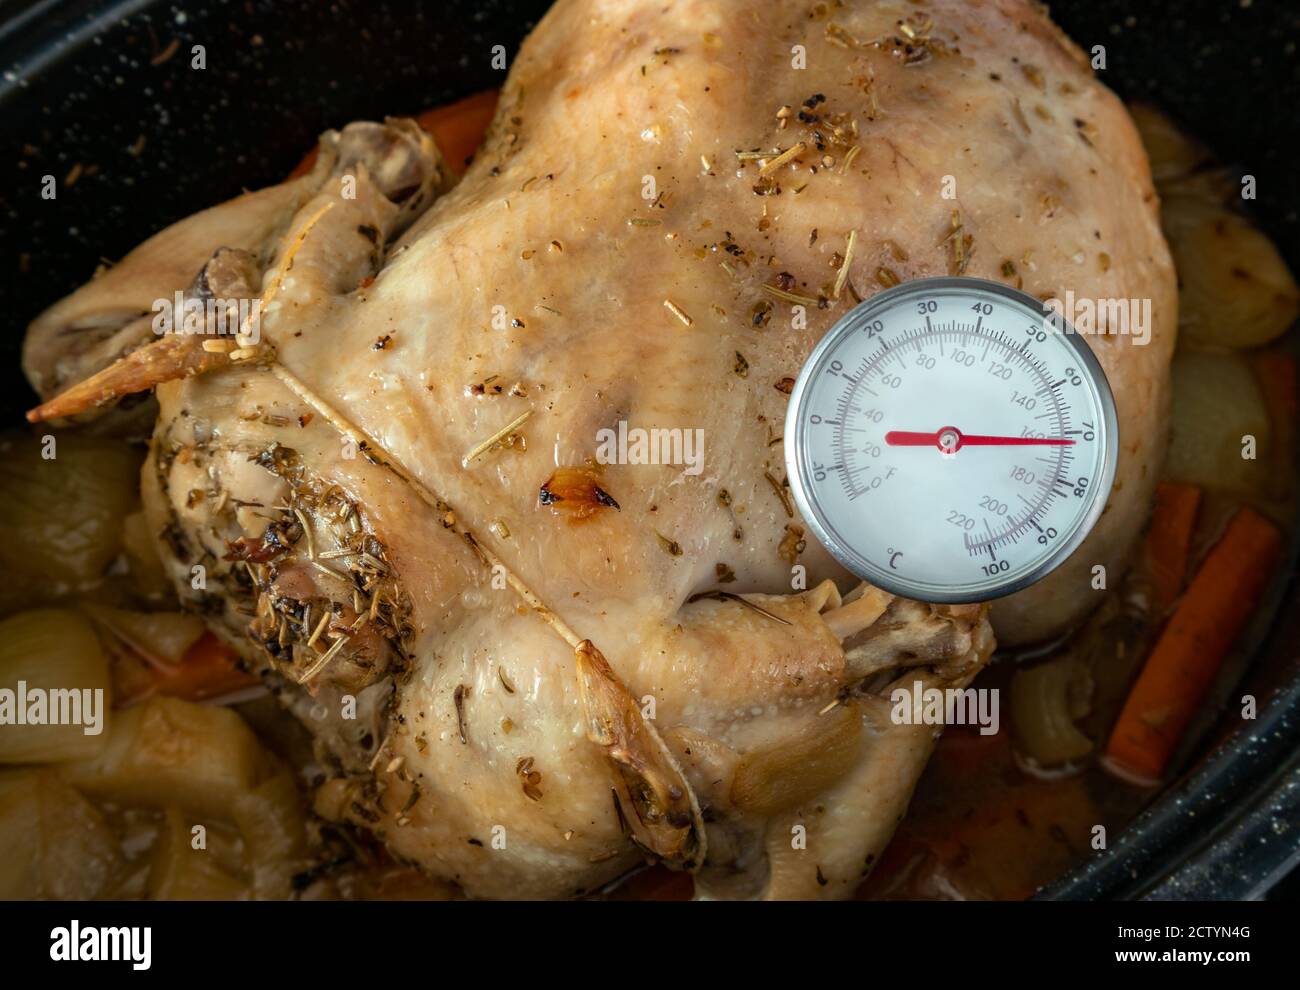 https://c8.alamy.com/comp/2CTYN4G/measuring-internal-temperature-of-oven-baked-chicken-meat-instant-read-thermometer-to-measure-food-safe-temperature-whole-chicken-in-black-pan-2CTYN4G.jpg